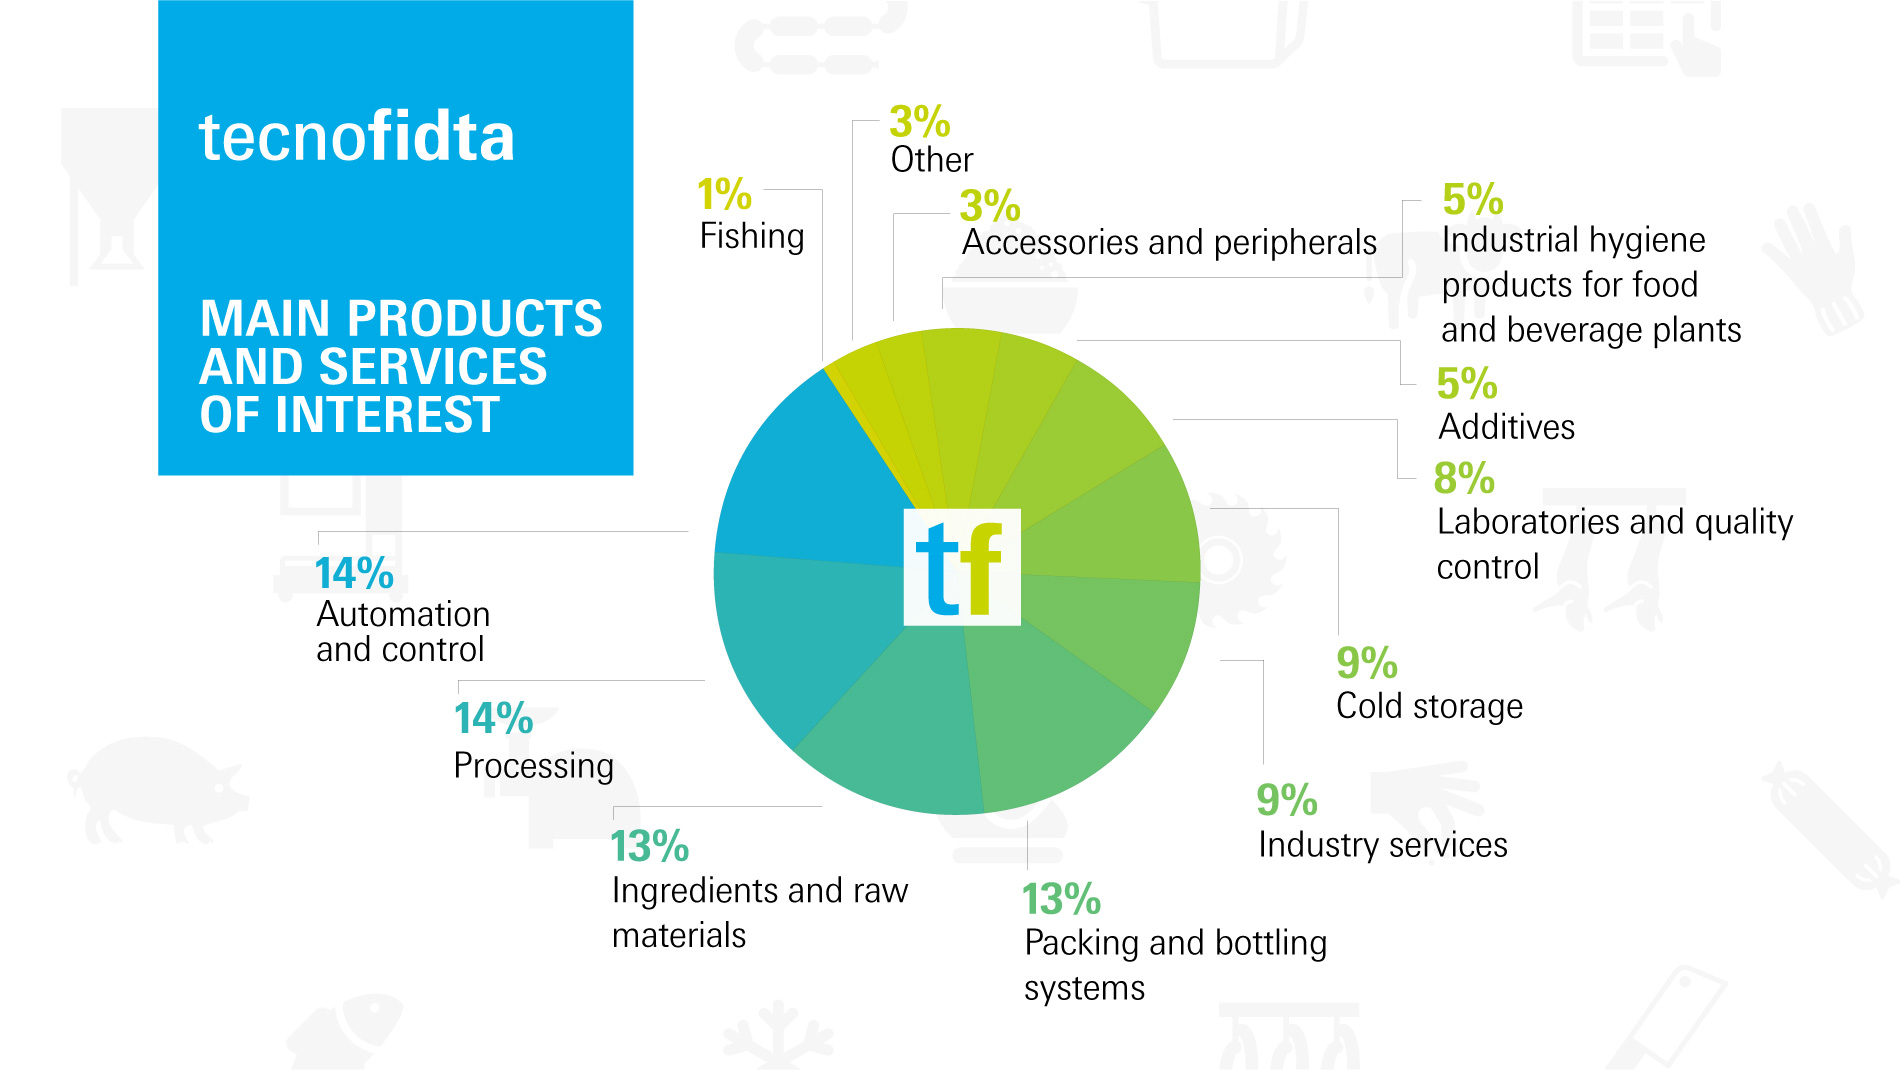 Tecno Fidta: Visitors - Main products of interest